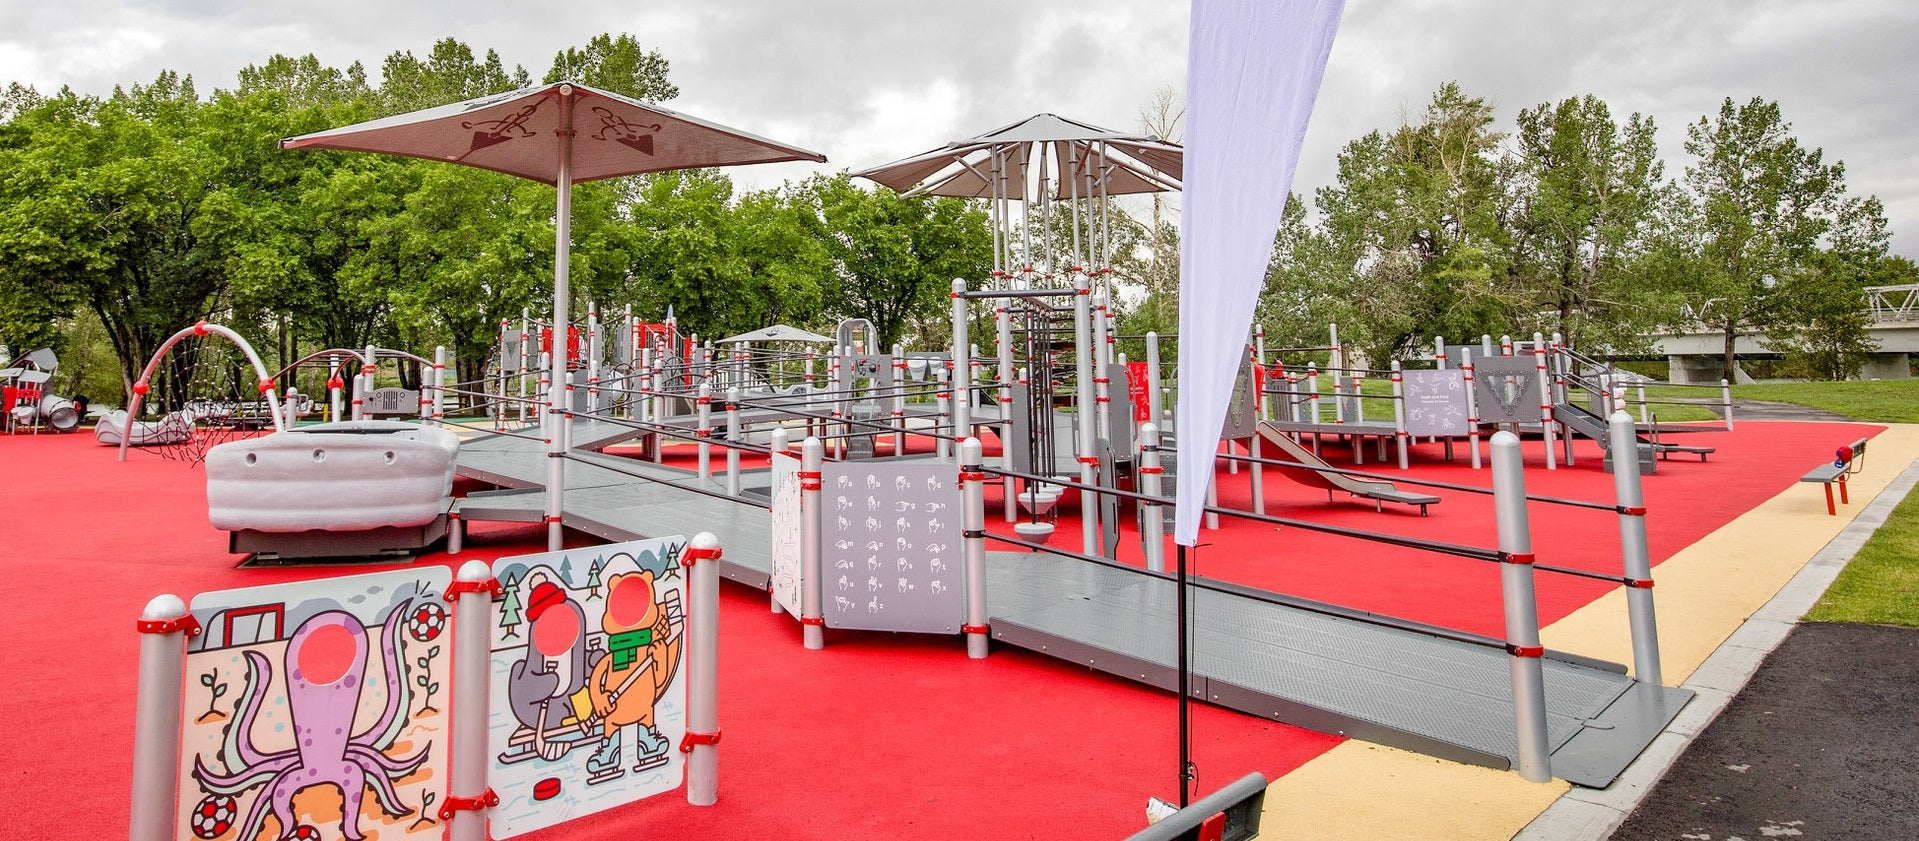 A photo of the Jumpstart Inclusive Playground in Calgary, AB showing the double-wide ramps and seamless surfacing.